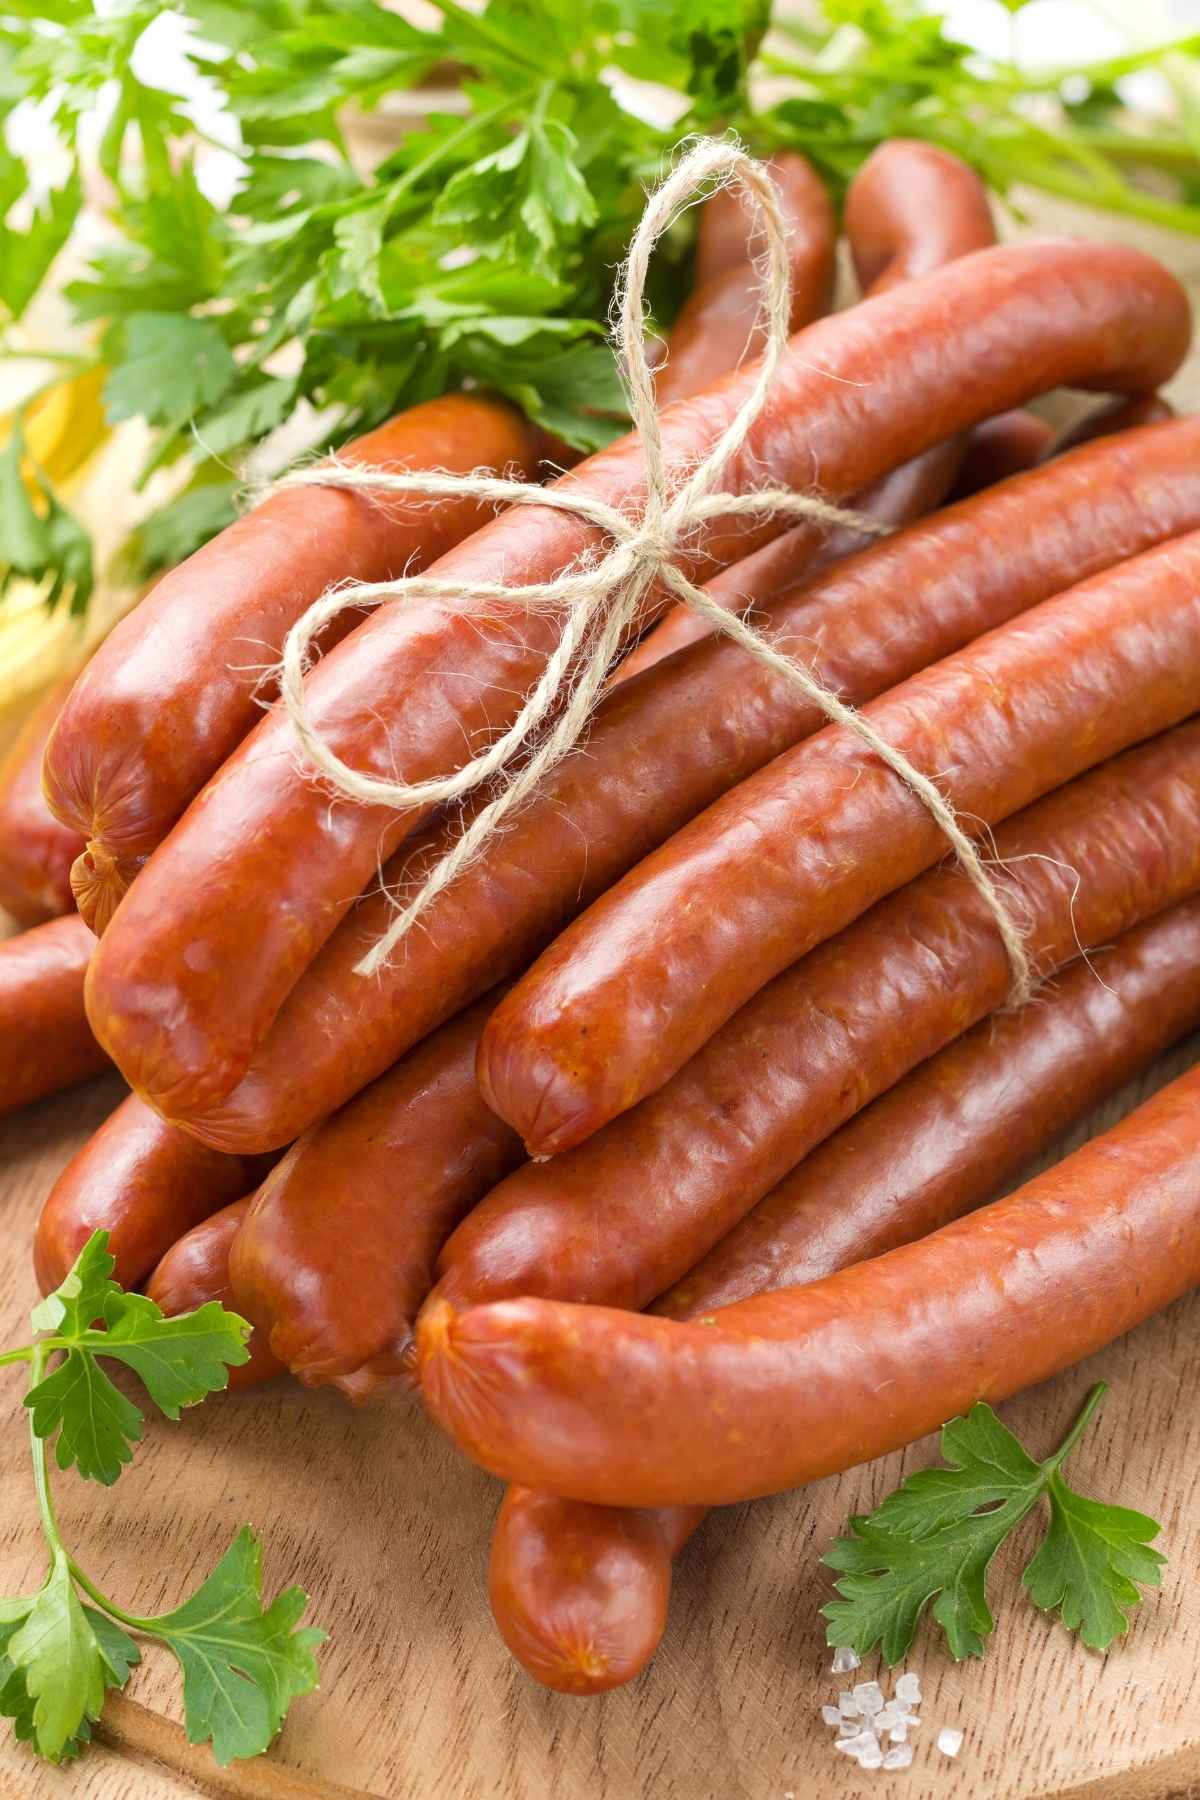 When cooking cuts of chicken, beef, or pork, you’re probably aware of the internal temperature necessary for the meat to be considered safe to eat. But what about sausage? If you’re planning to serve pork sausage, you should also ensure that it’s fully cooked through. Today we’re sharing some guidelines on the proper Sausage Internal Temp.